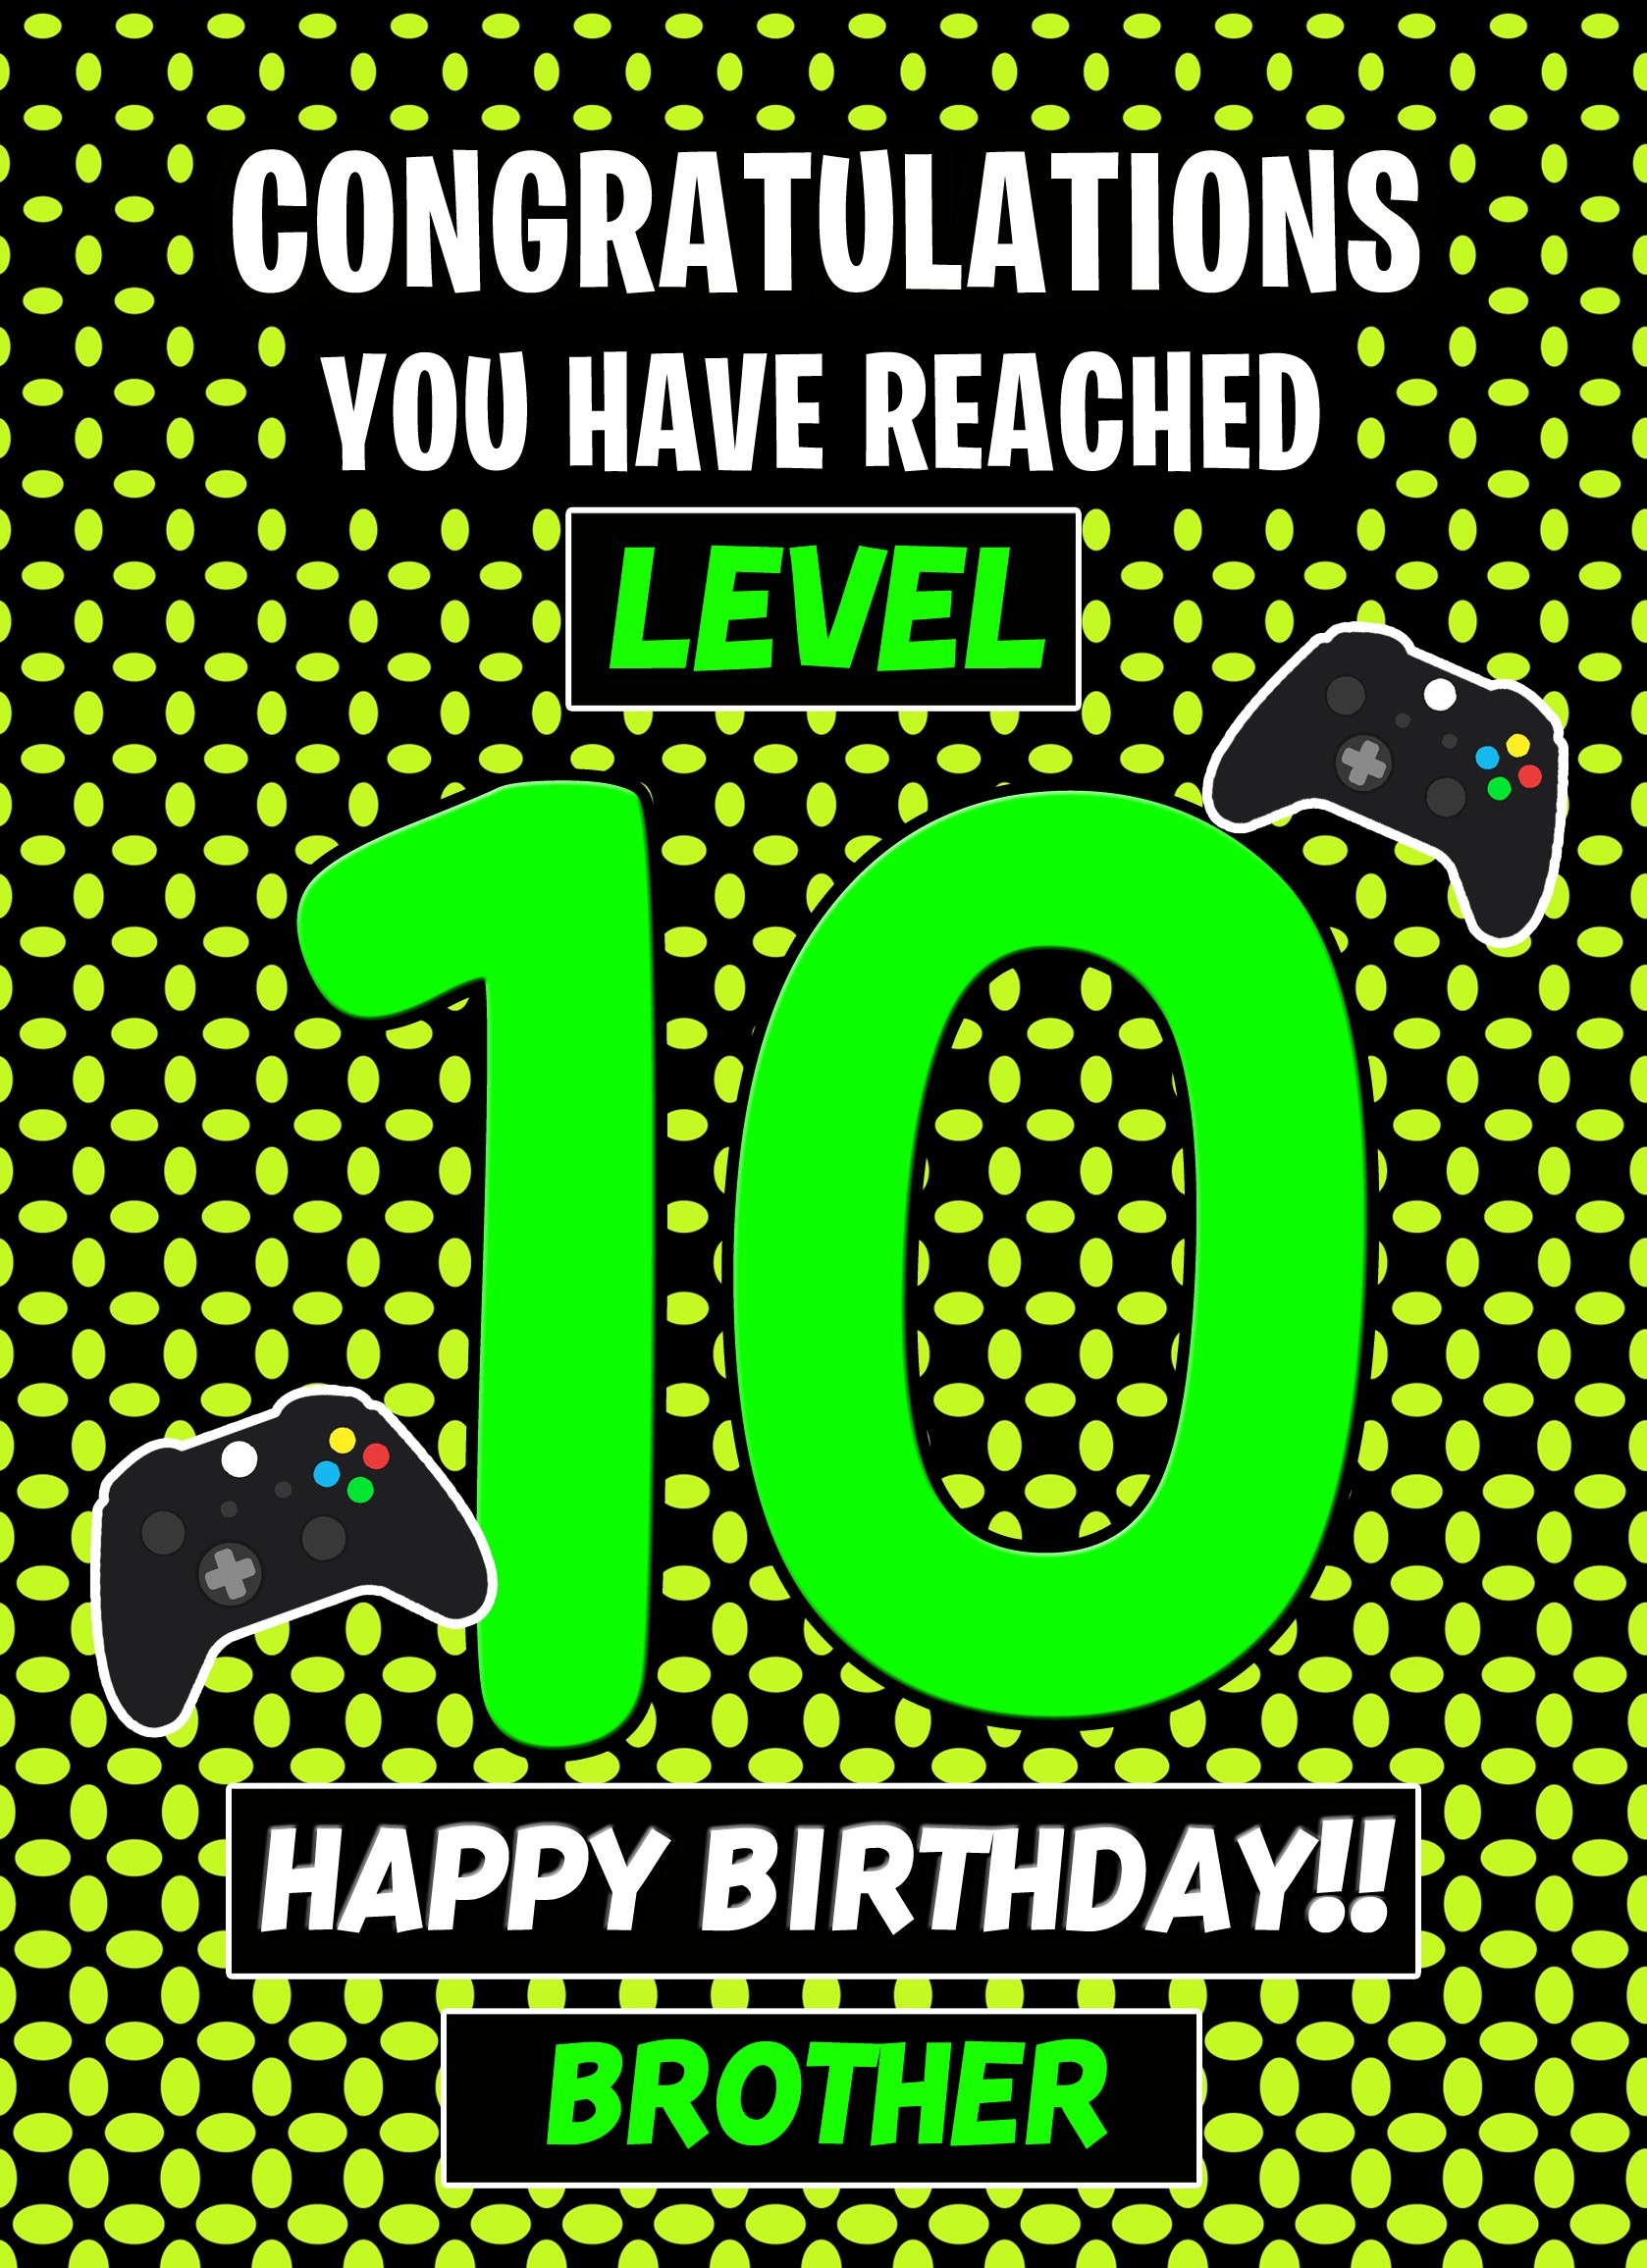 Brother 10th Birthday Card (Level Up Gamer)